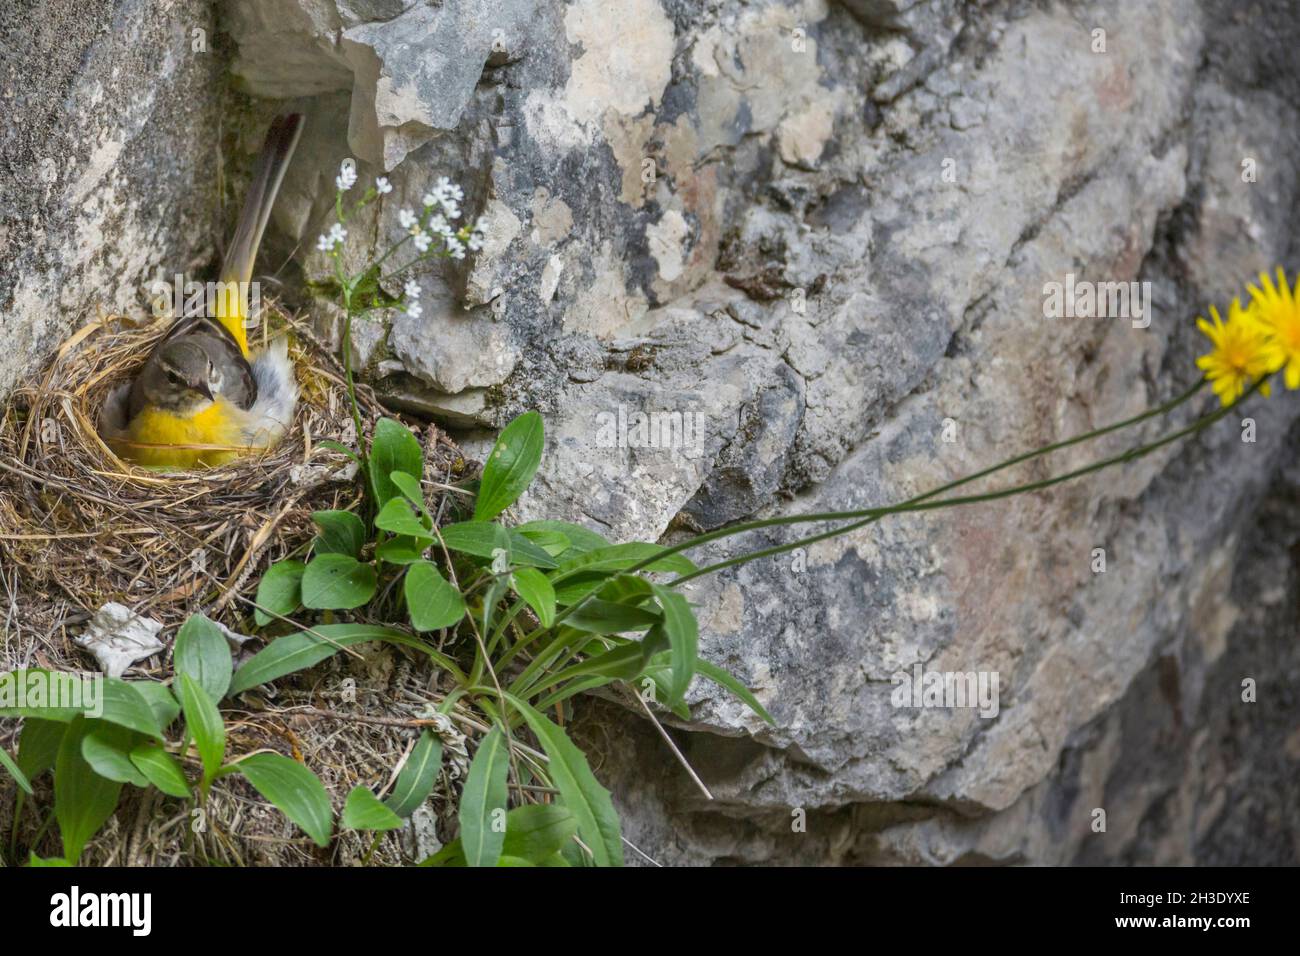 grey wagtail (Motacilla cinerea), female breeding in the nest at a rock wall, Germany Stock Photo